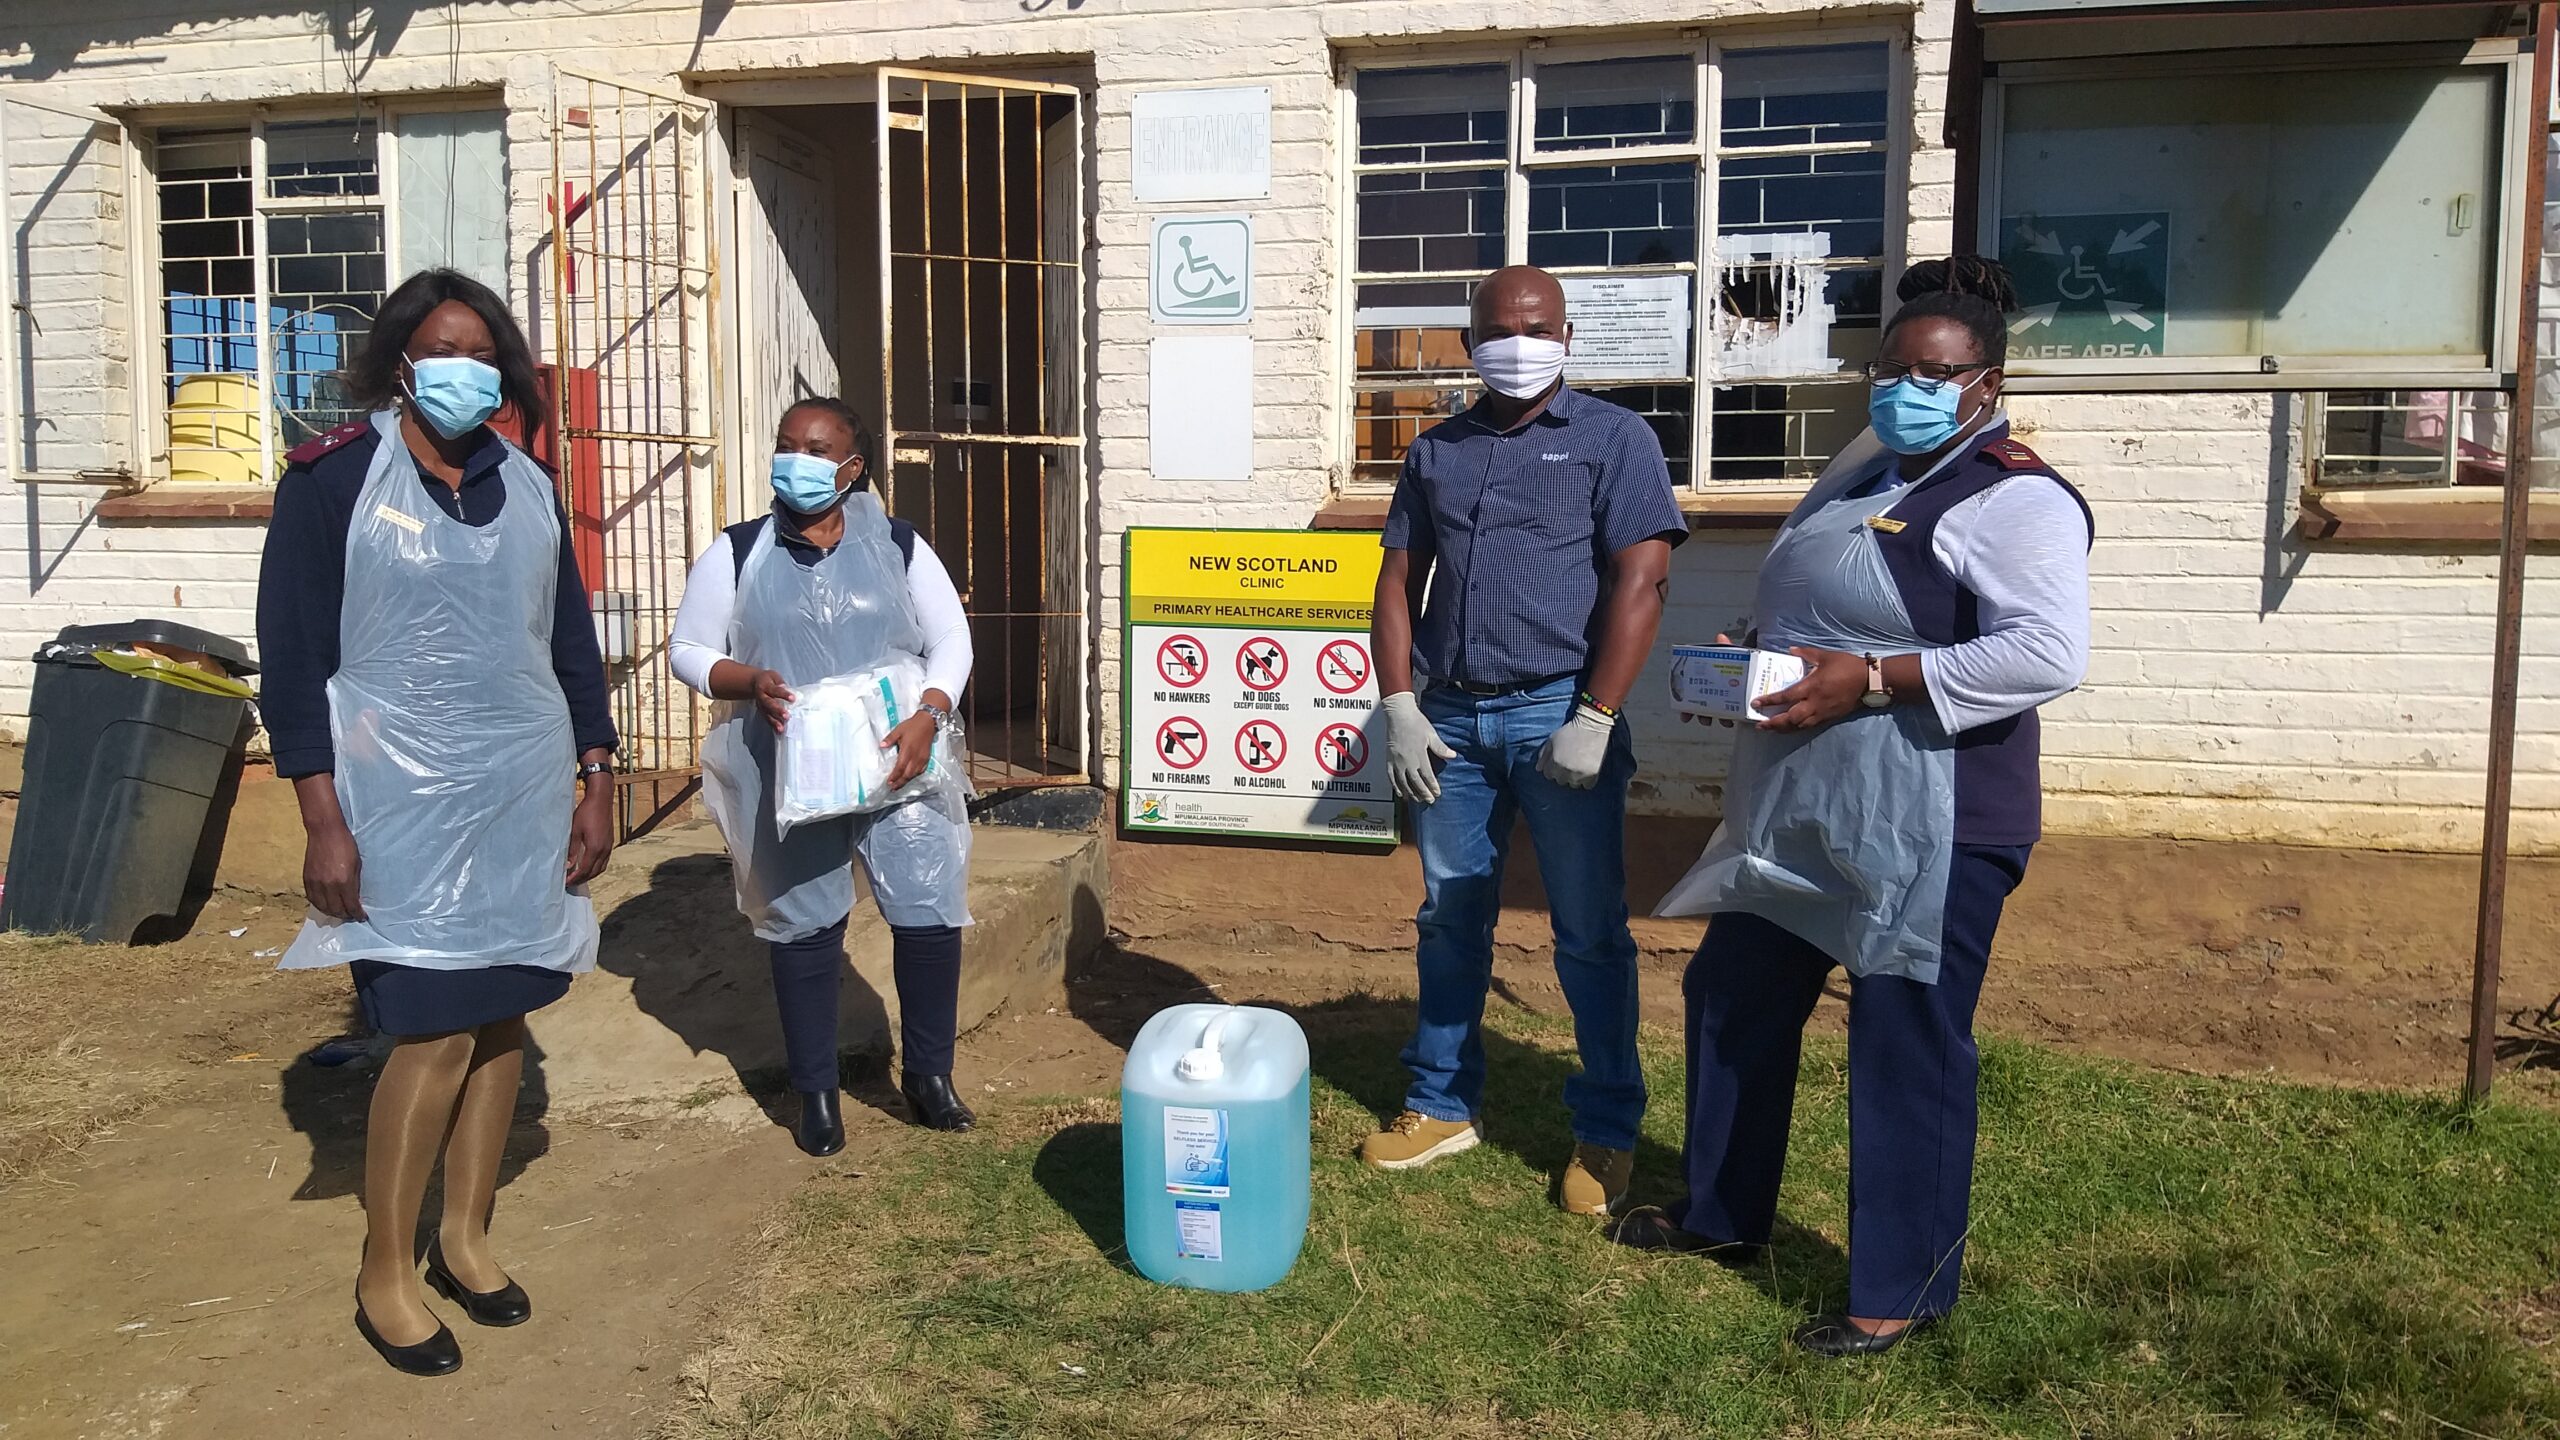 Sappi distributed the sanitiser to more than 80 community clinics and healthcare centres in the rural and peri-urban areas of KwaZulu-Natal and Mpumalanga.